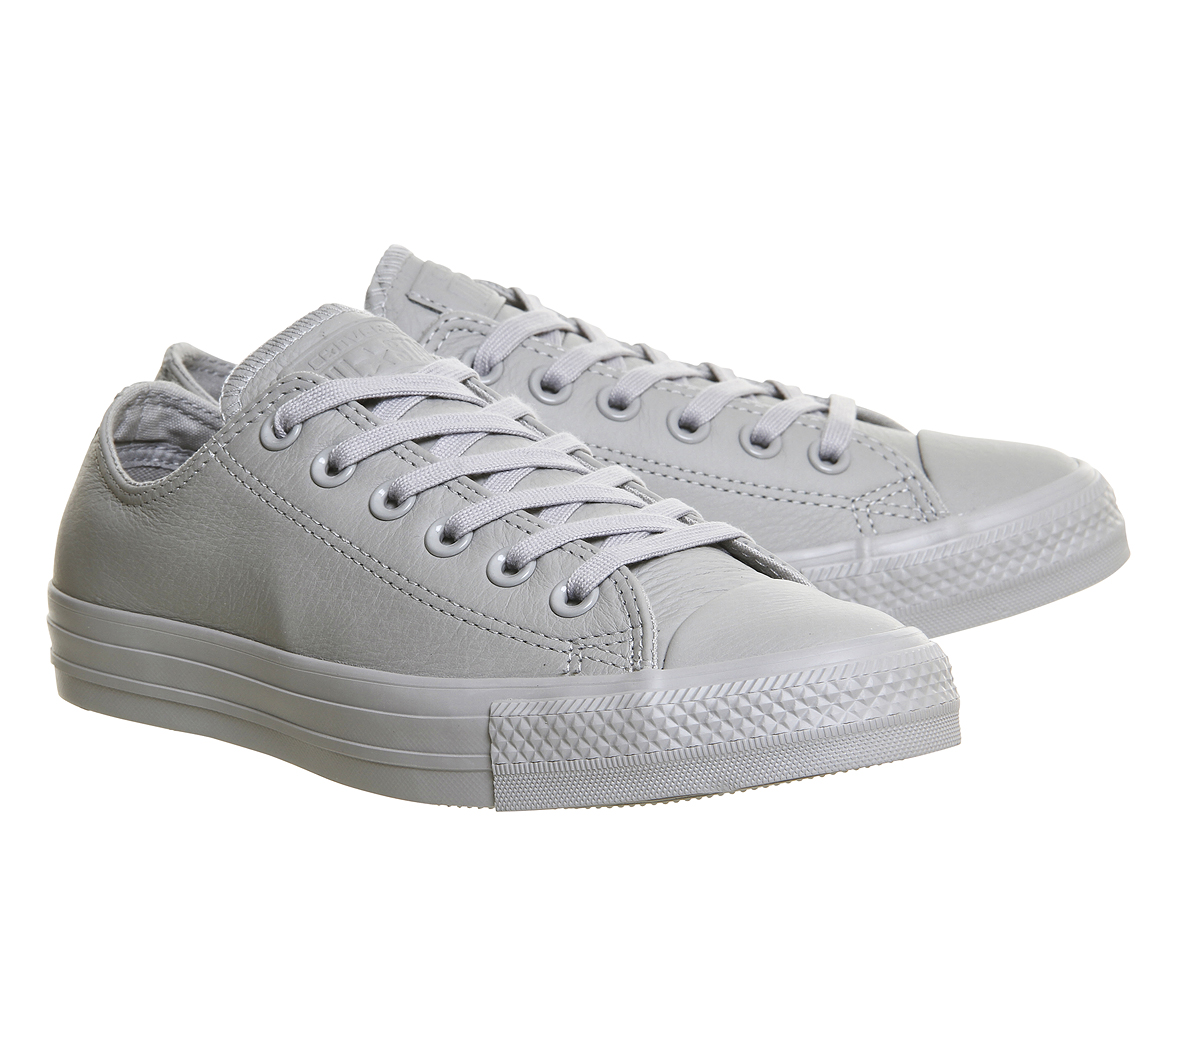 Converse All Star Low Leather Grey Mono - Unisex Sports